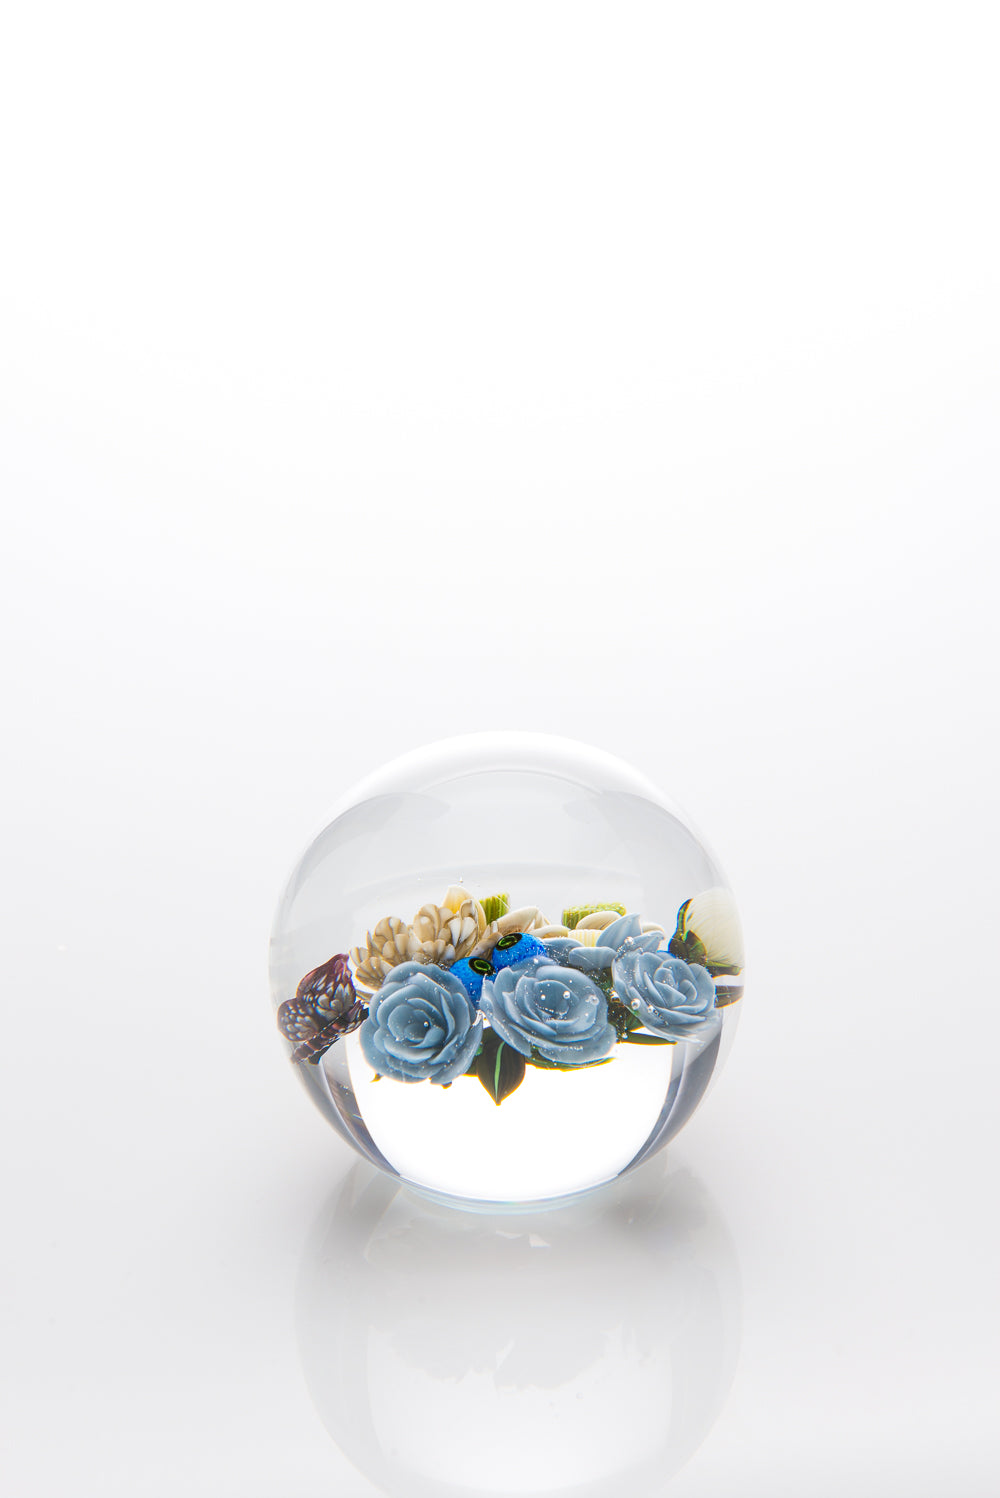 Three Inch Orb or Paper Weight with Floral Arrangement by Akihiro Okama